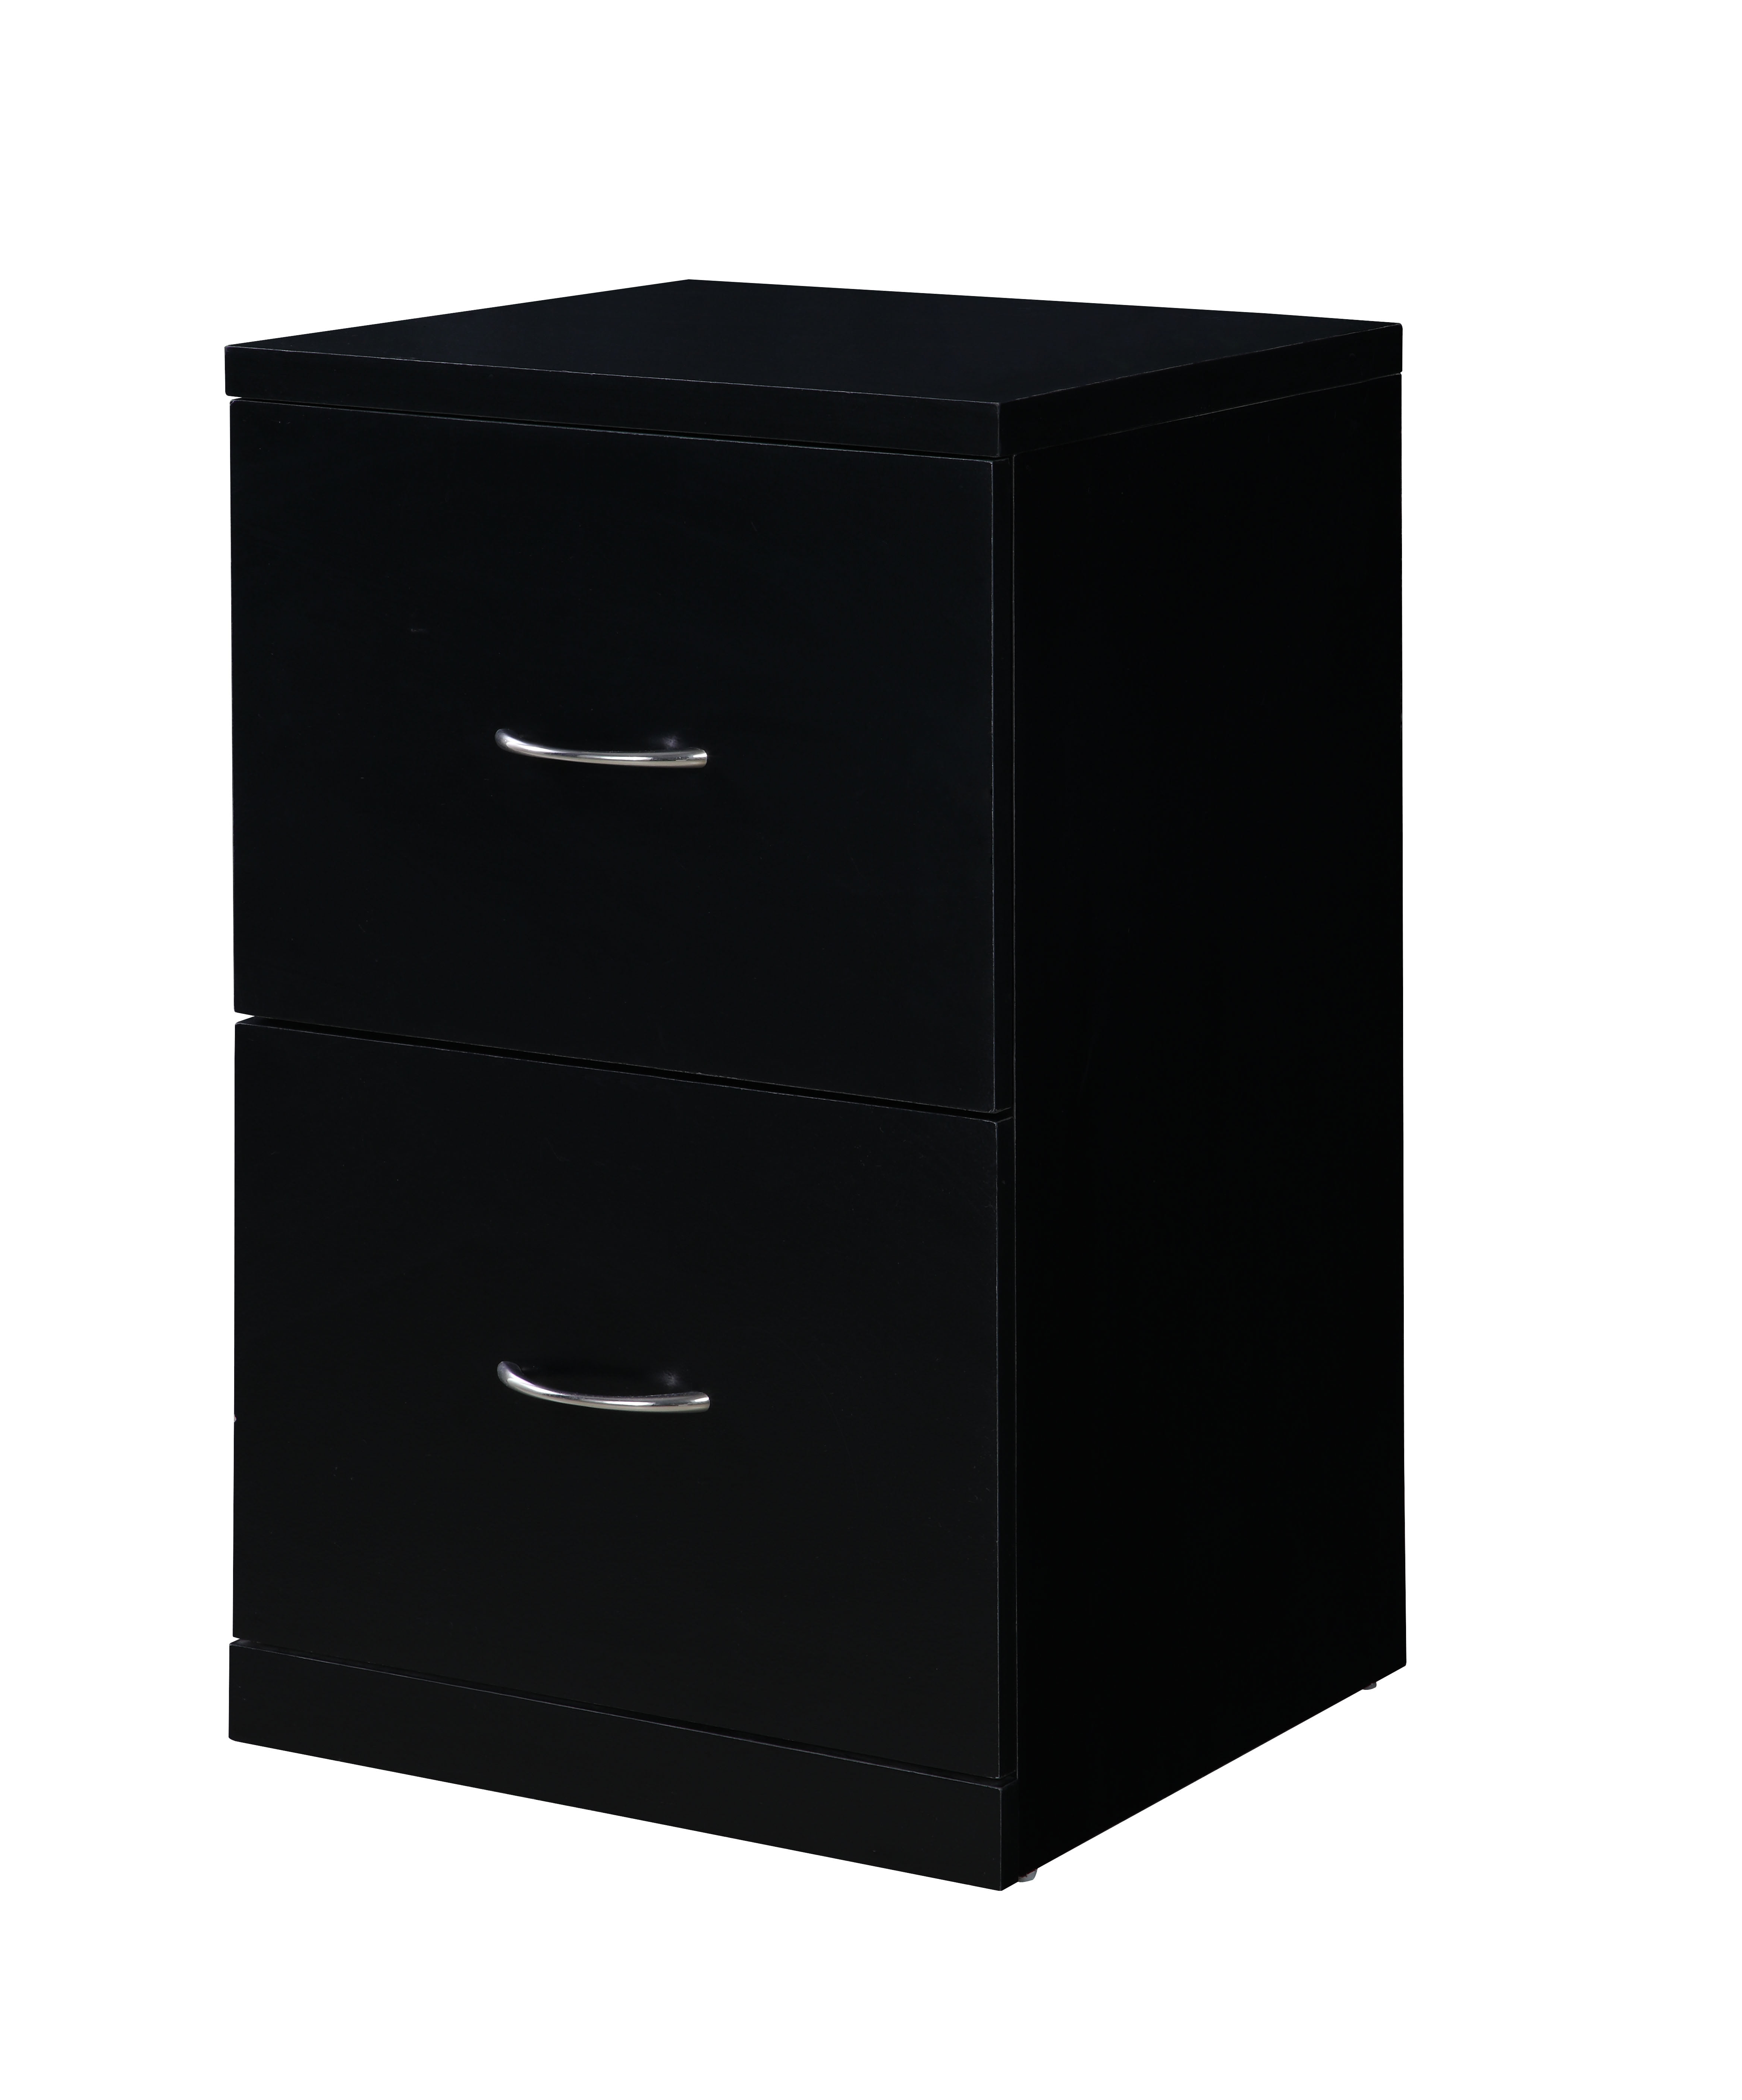 Mainstays 2 Drawer Wood File Cabinet